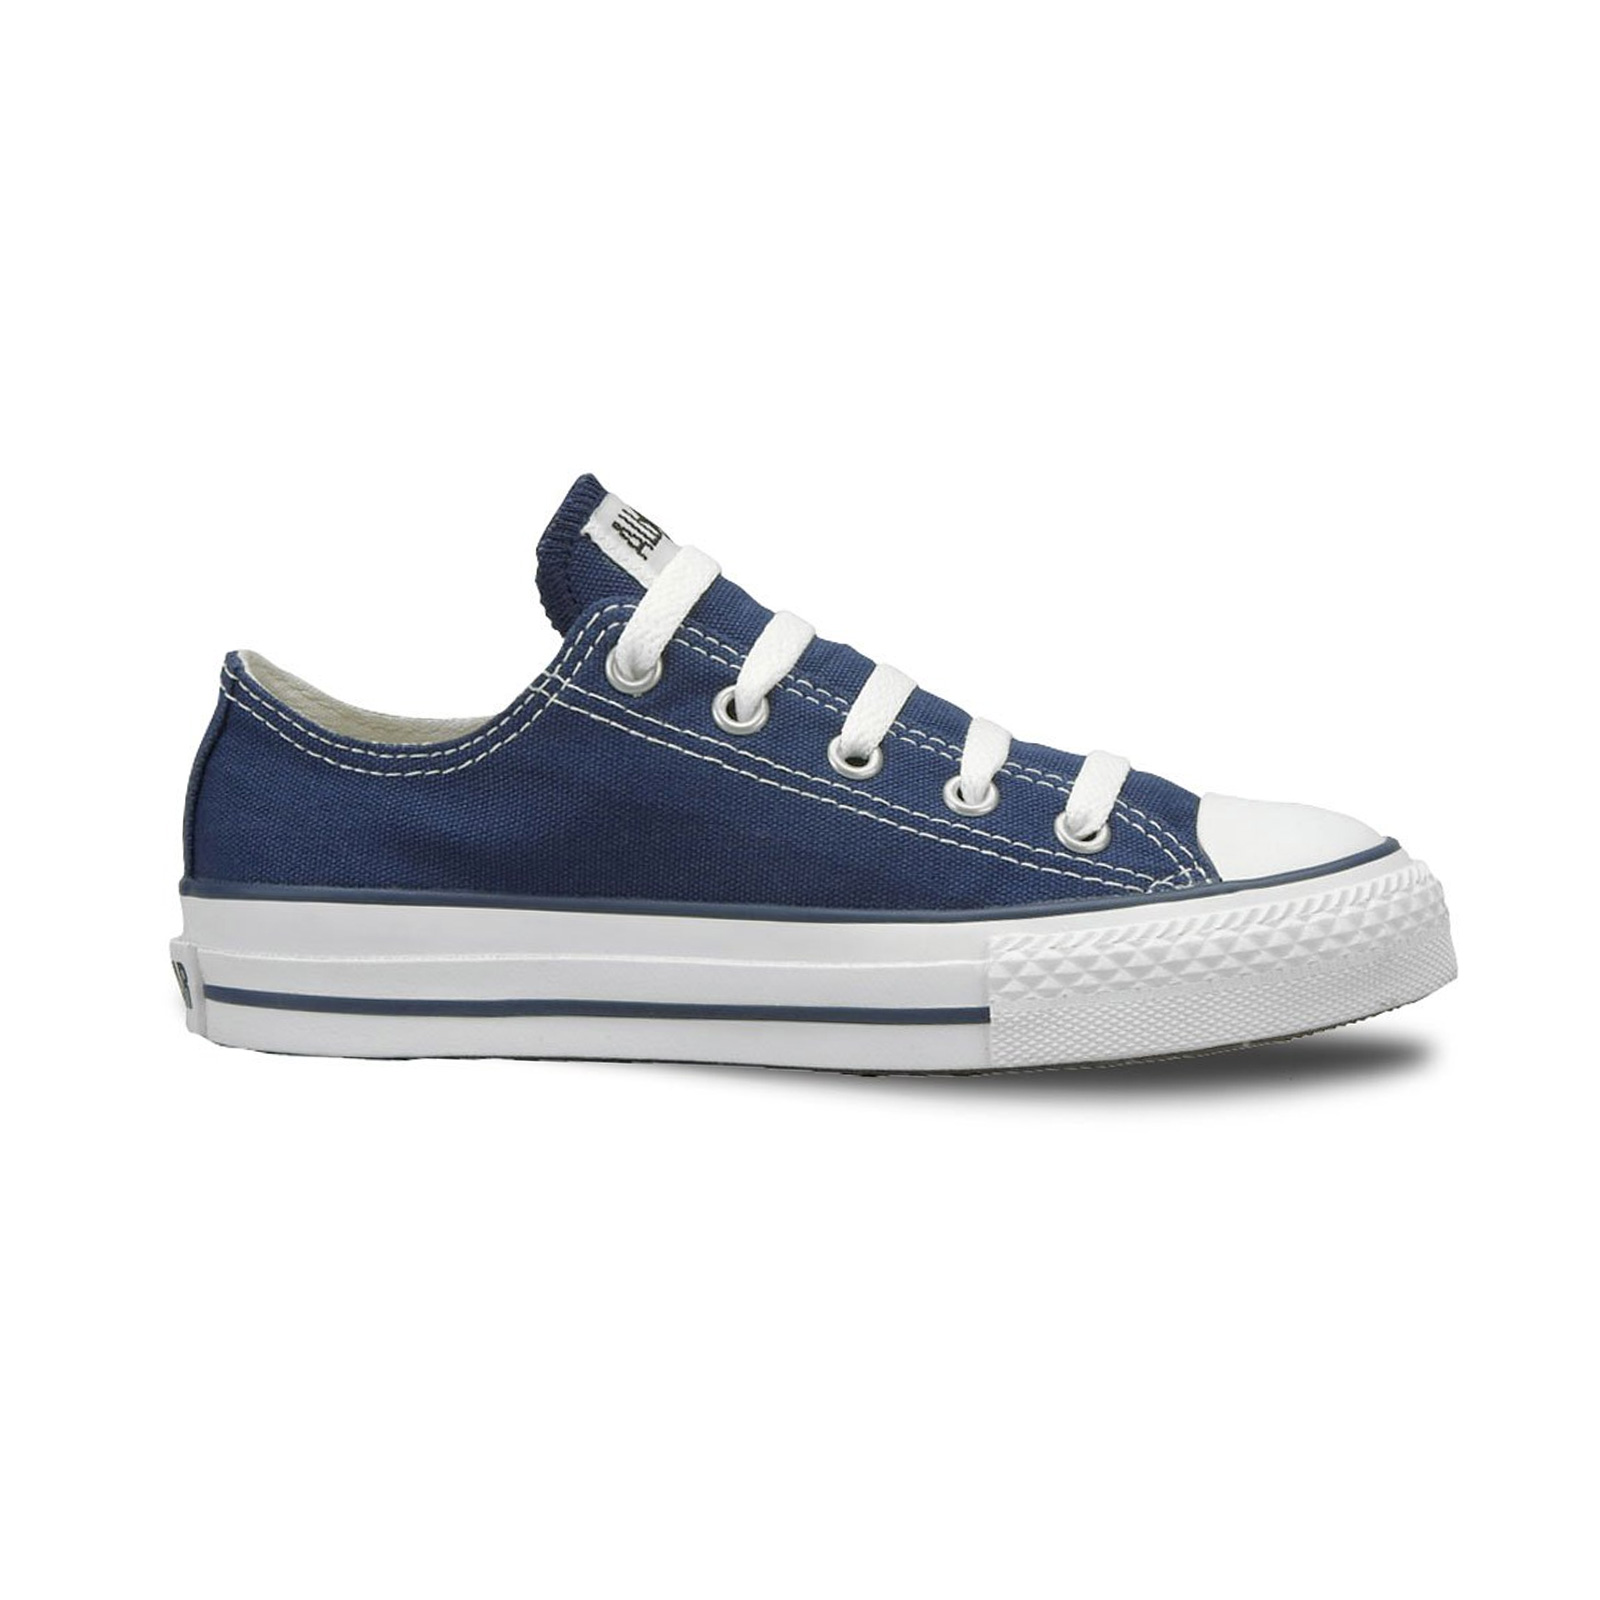 Converse - CHUCK TAYLOR ALL STAR - 410-NAVY Παιδικά > Παπούτσια > Sneaker > Παπούτσι Mid Cut